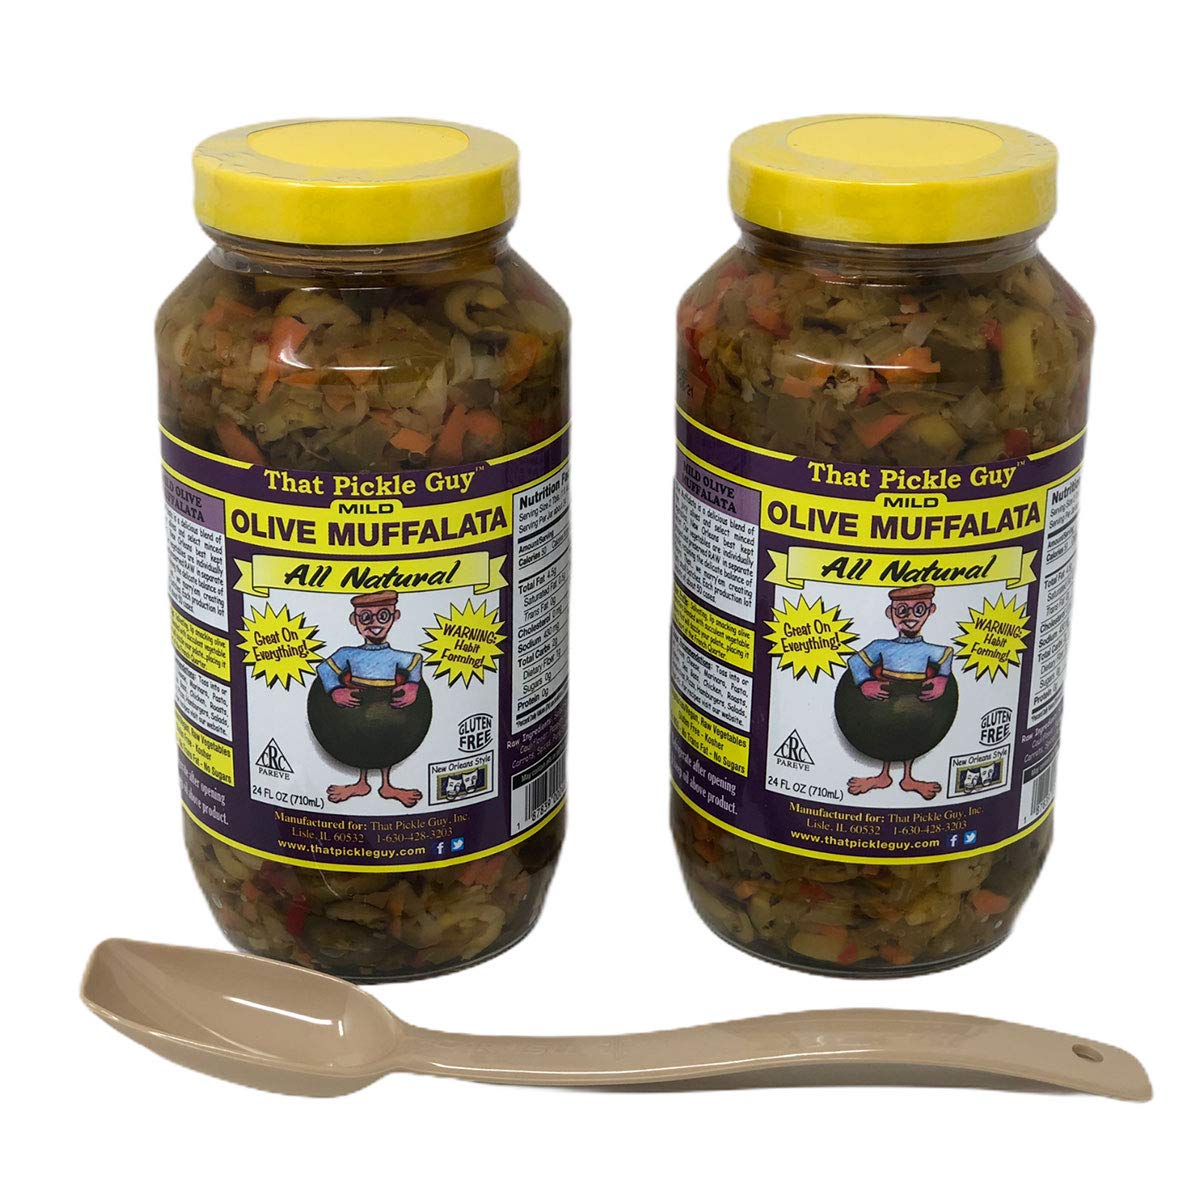 That Pickle Guy Mild Olive Muffalata (2 x 24 oz jars) bundle with a serving spoon